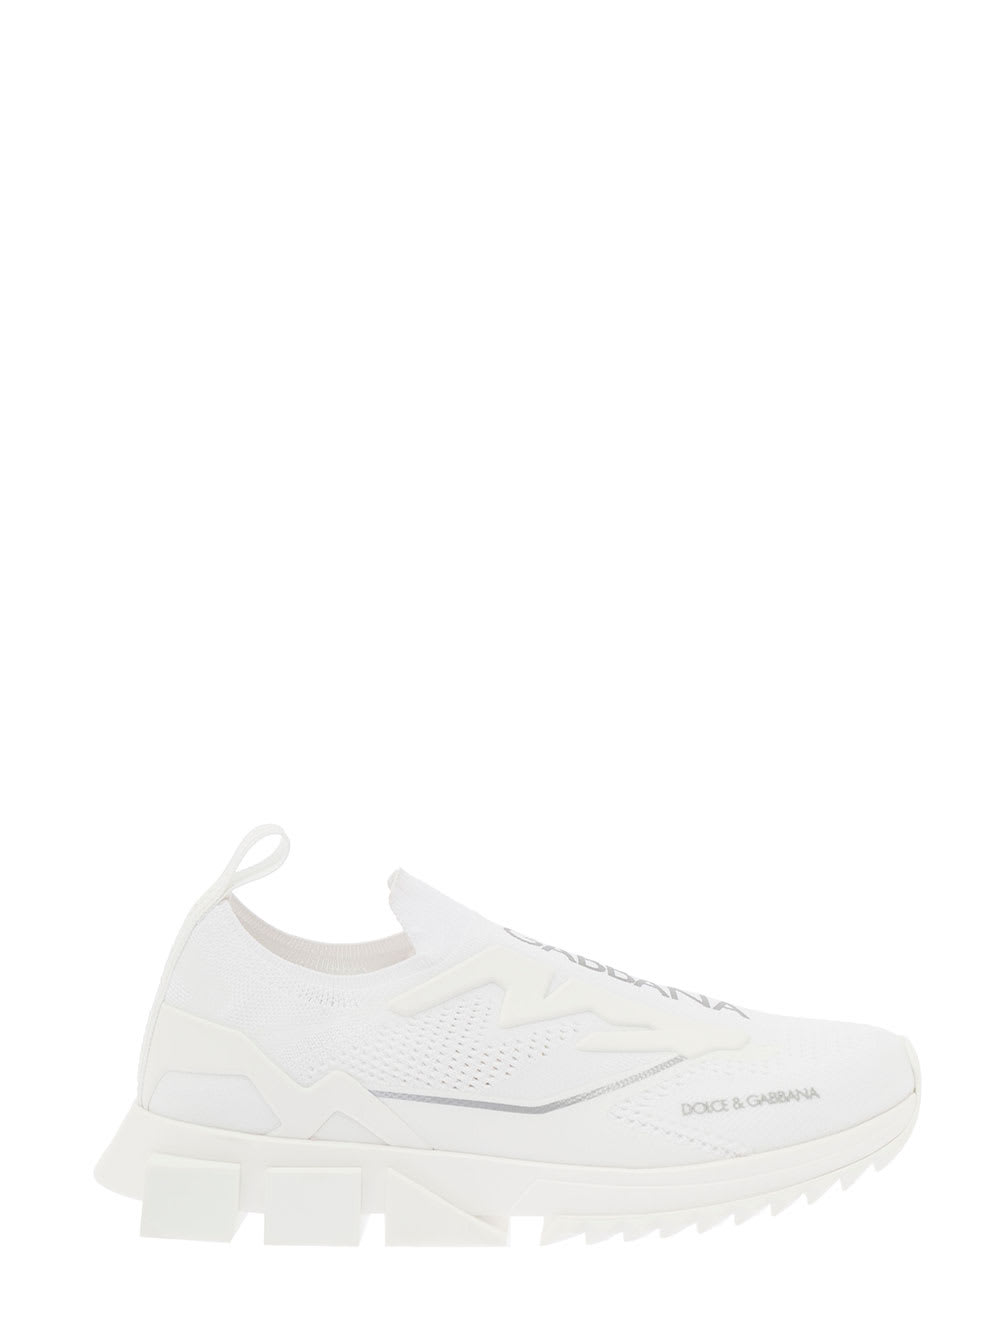 Dolce & Gabbana Womans White Stretch Fabric Sneakers With Logo